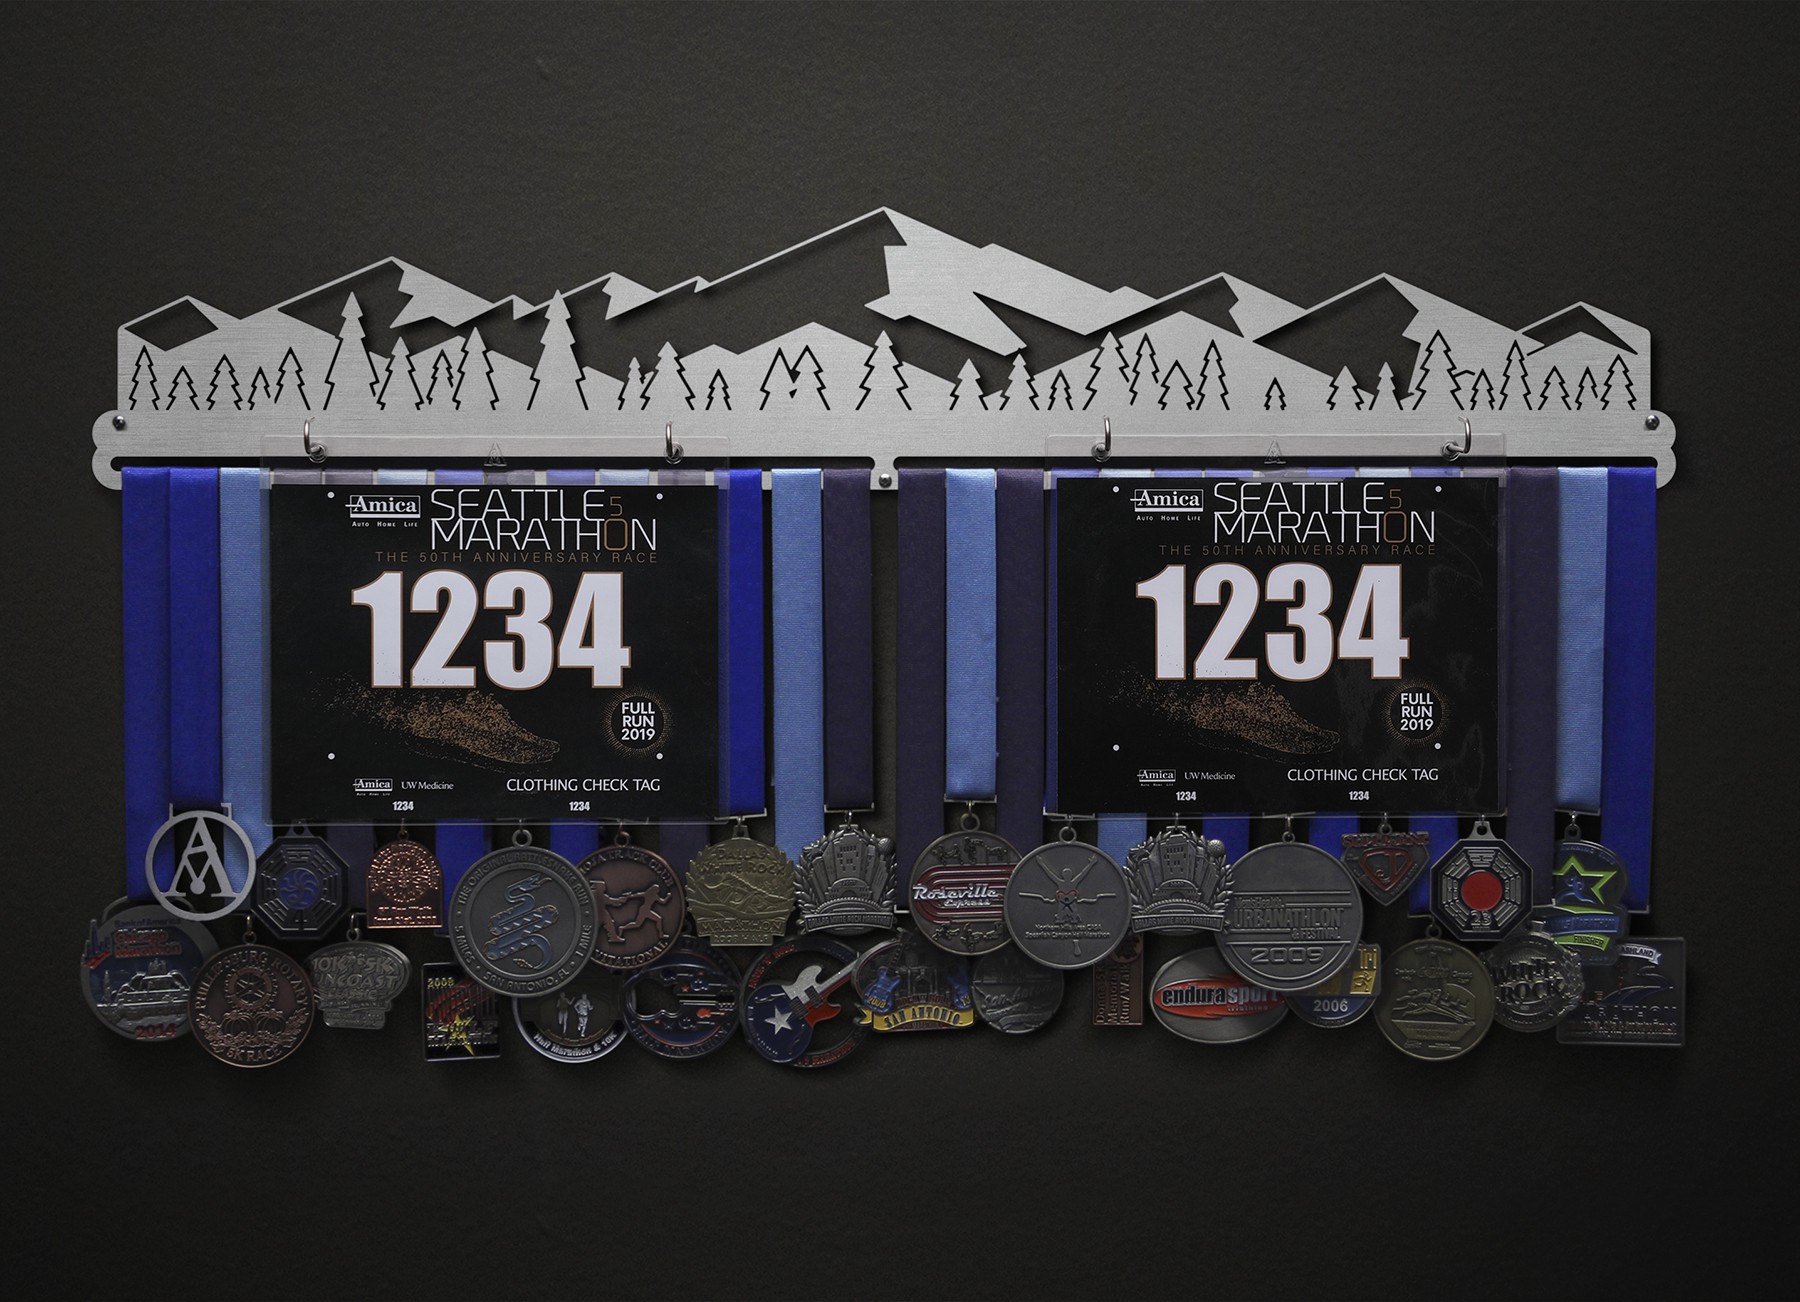 Mountain Scene - Stylized Version Bib and Medal Display